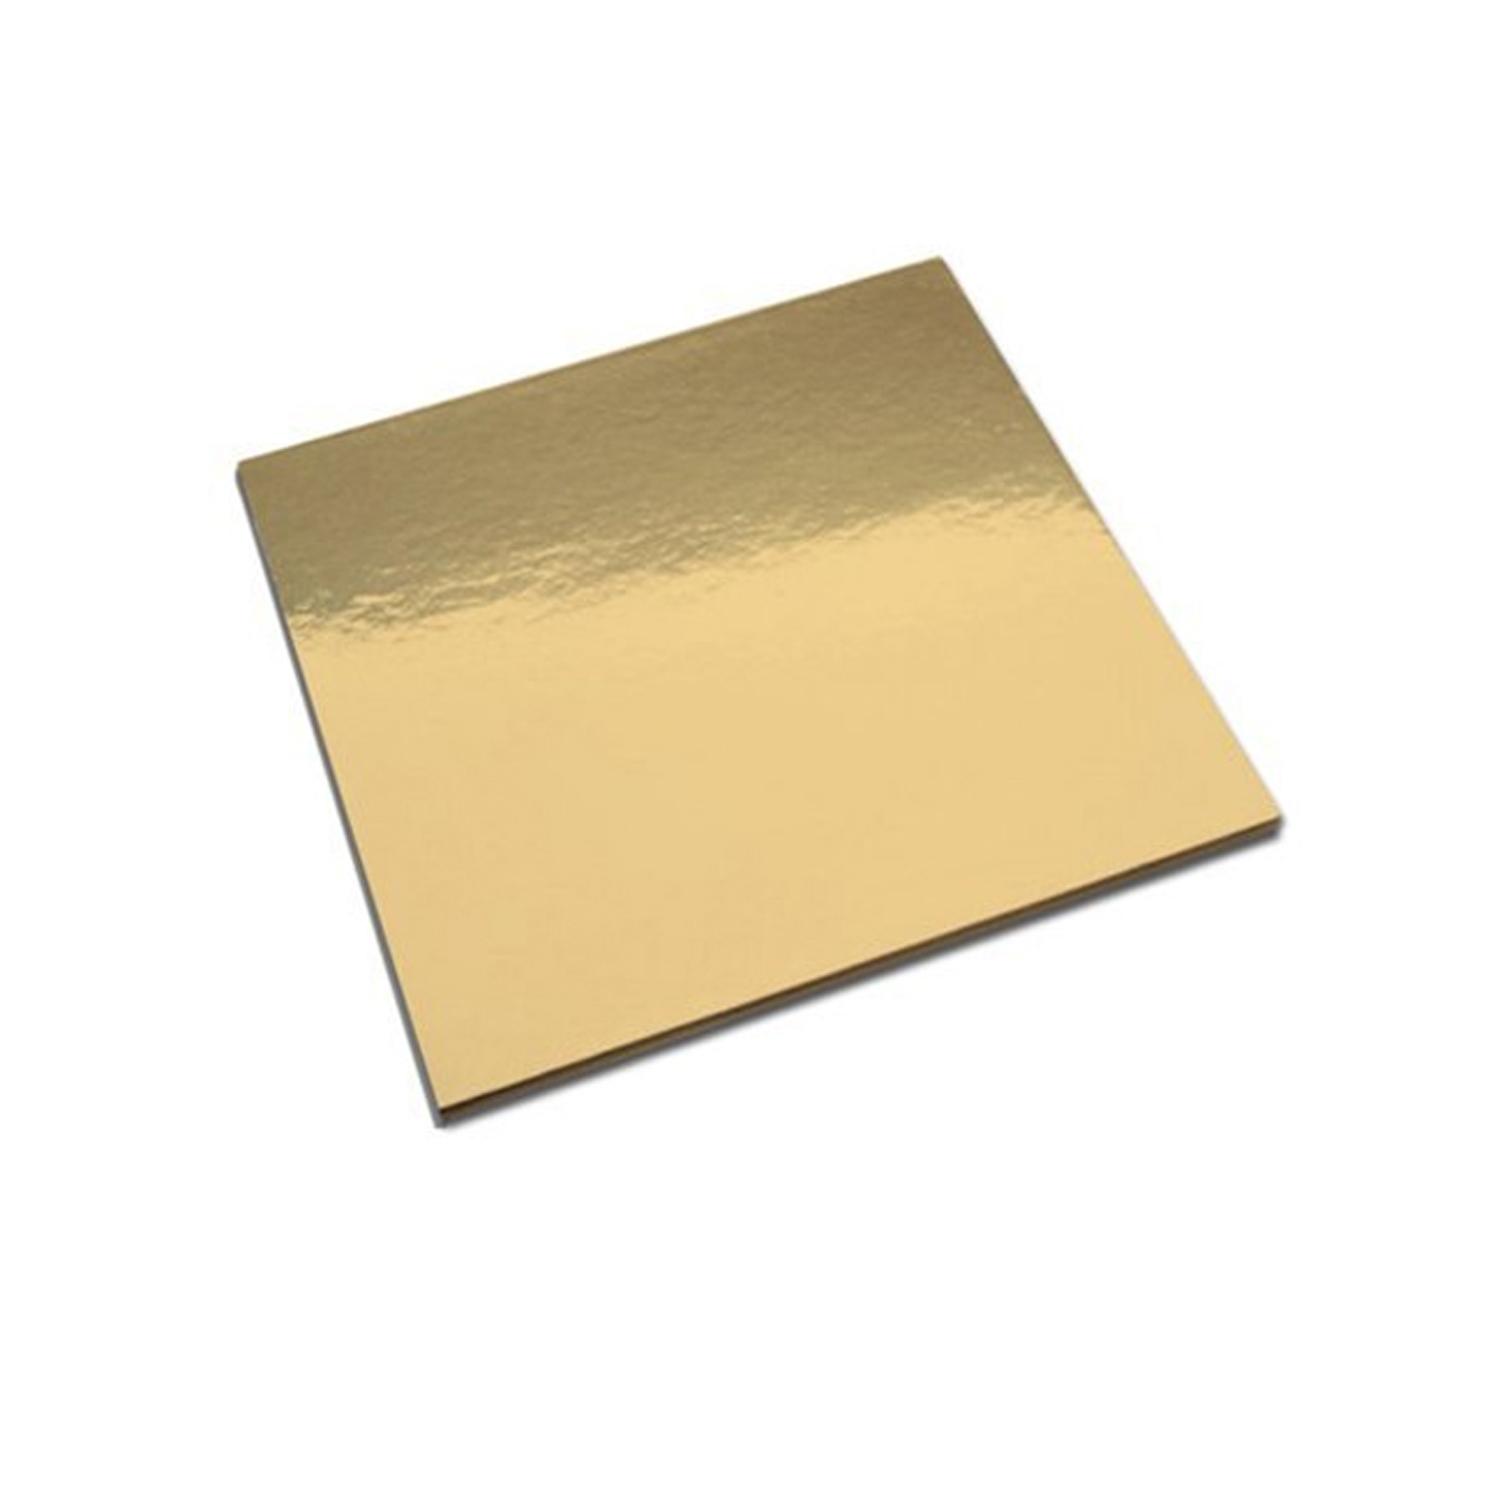 12'' SQUARE SMOOTH GOLD CAKE BOARD